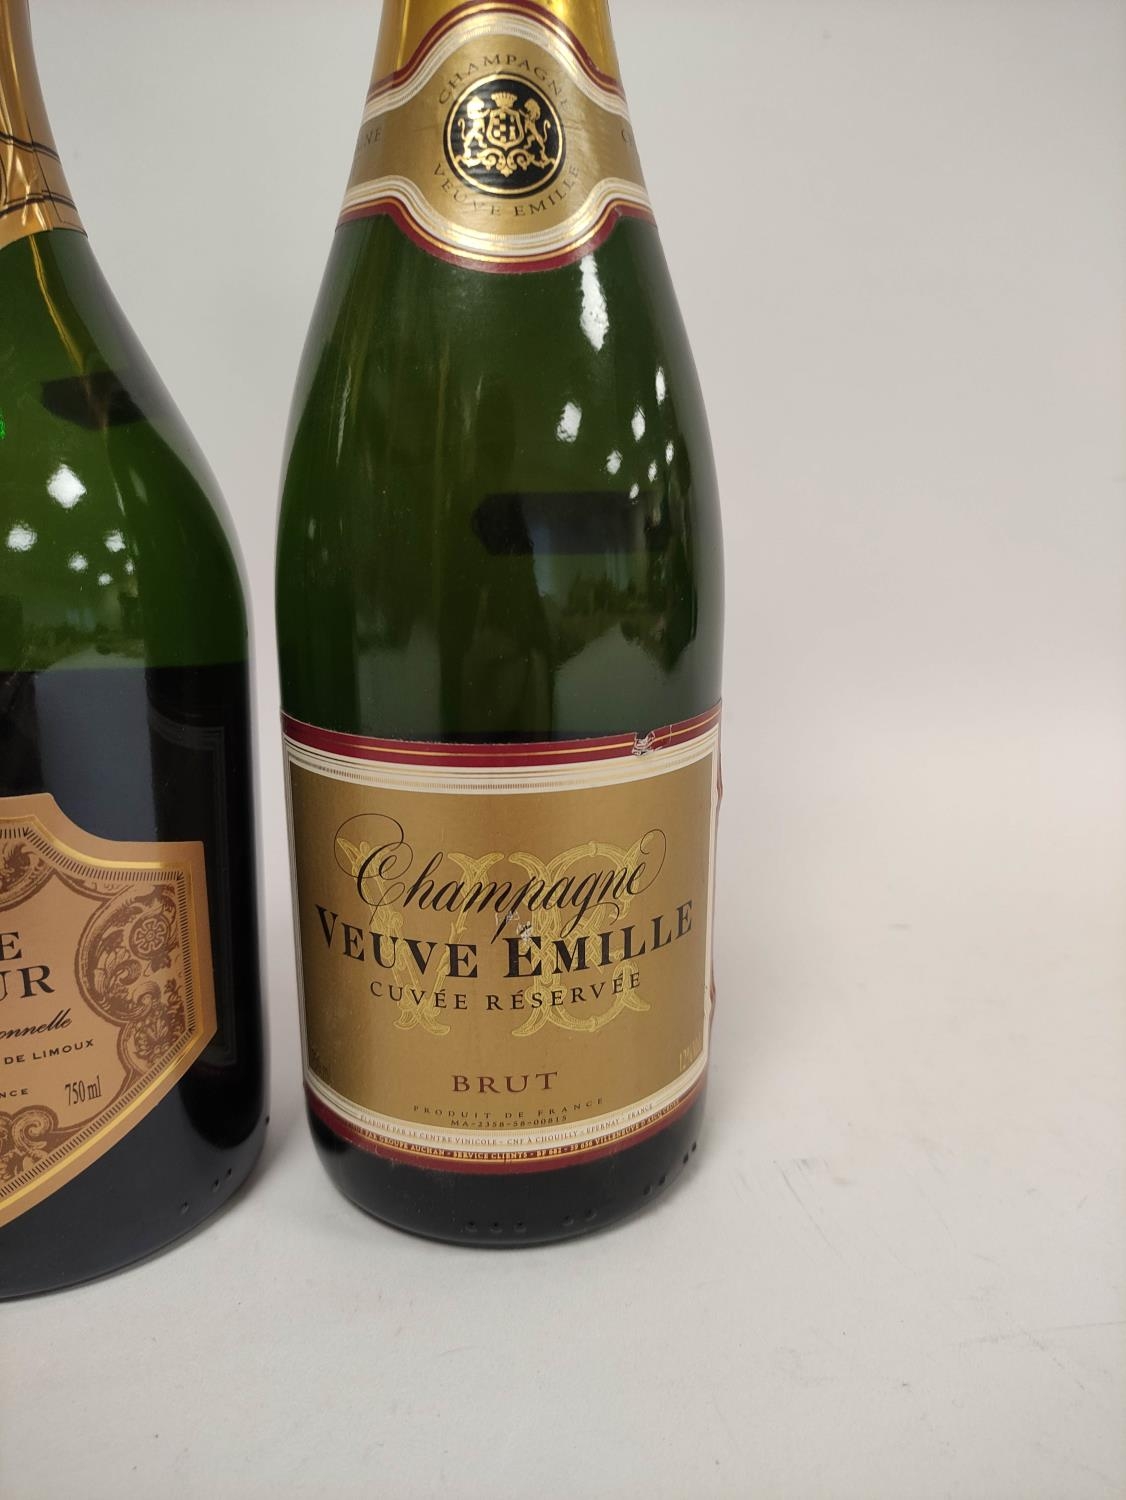 Roche Lacour 2019 brut sparkling wine, 750ml, 12.5%, with Veuve Emille cuvee reserve brut champagne, - Image 5 of 5